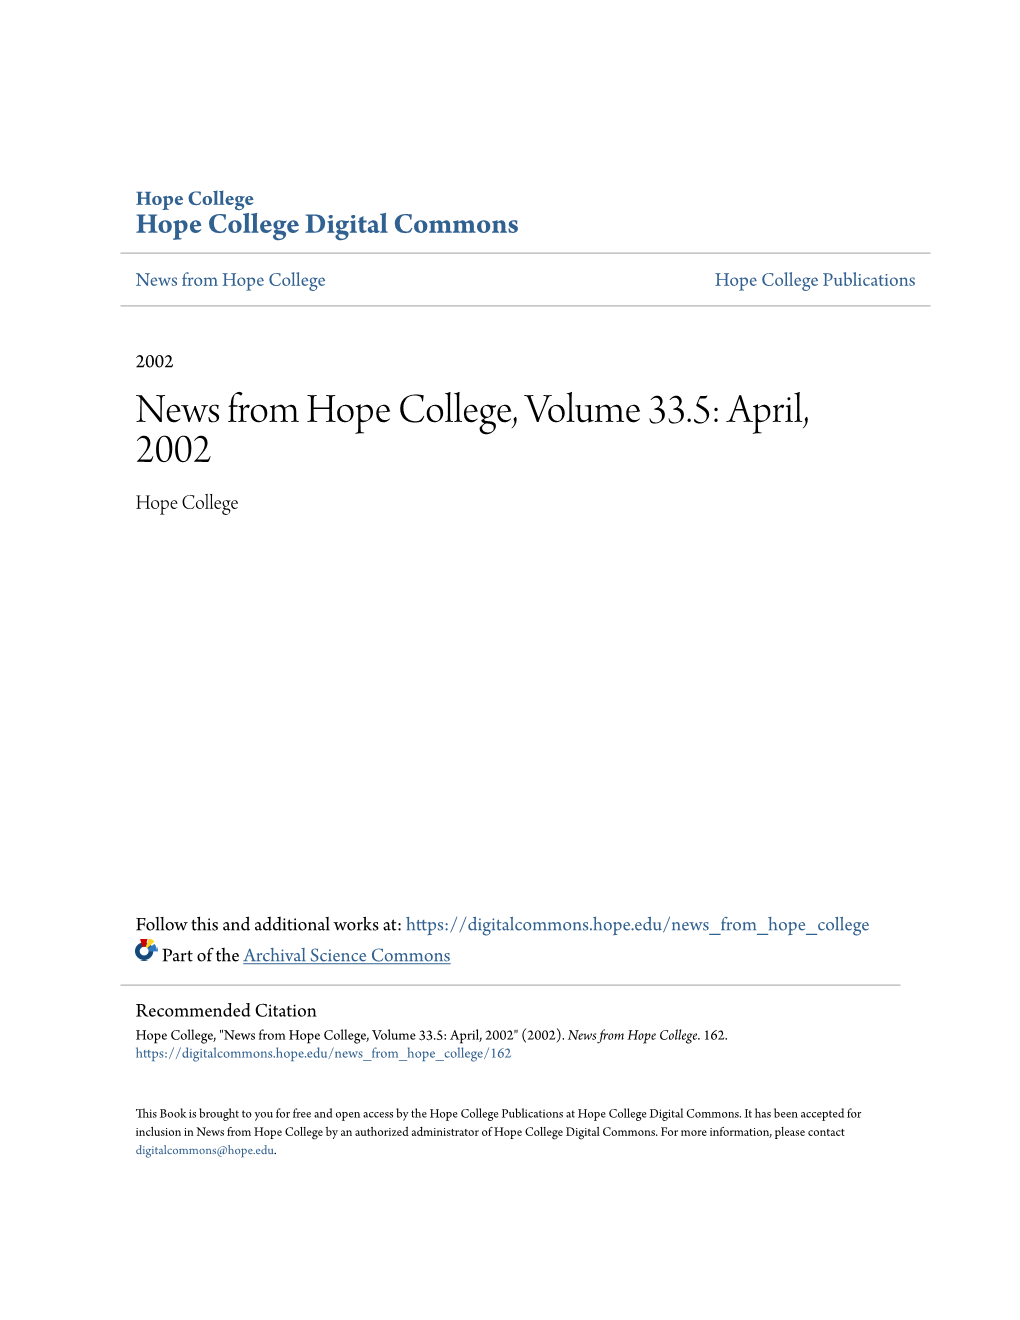 News from Hope College, Volume 33.5: April, 2002 Hope College